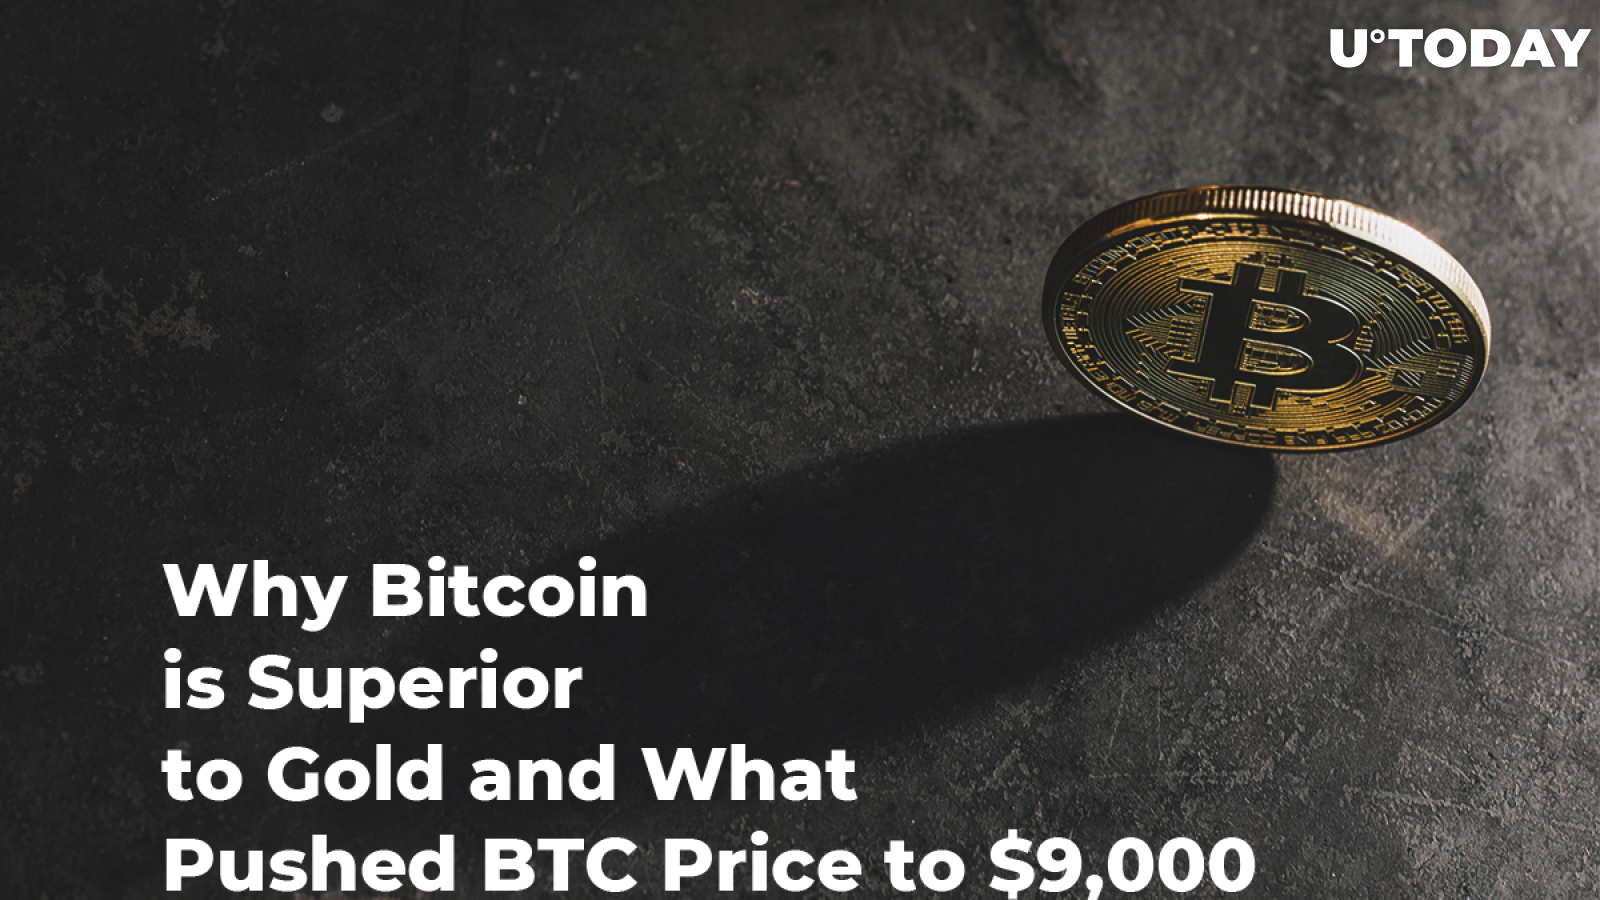 Stock Market Expert Explains Why Bitcoin Is Superior to Gold and What Pushed BTC Price to $9,000